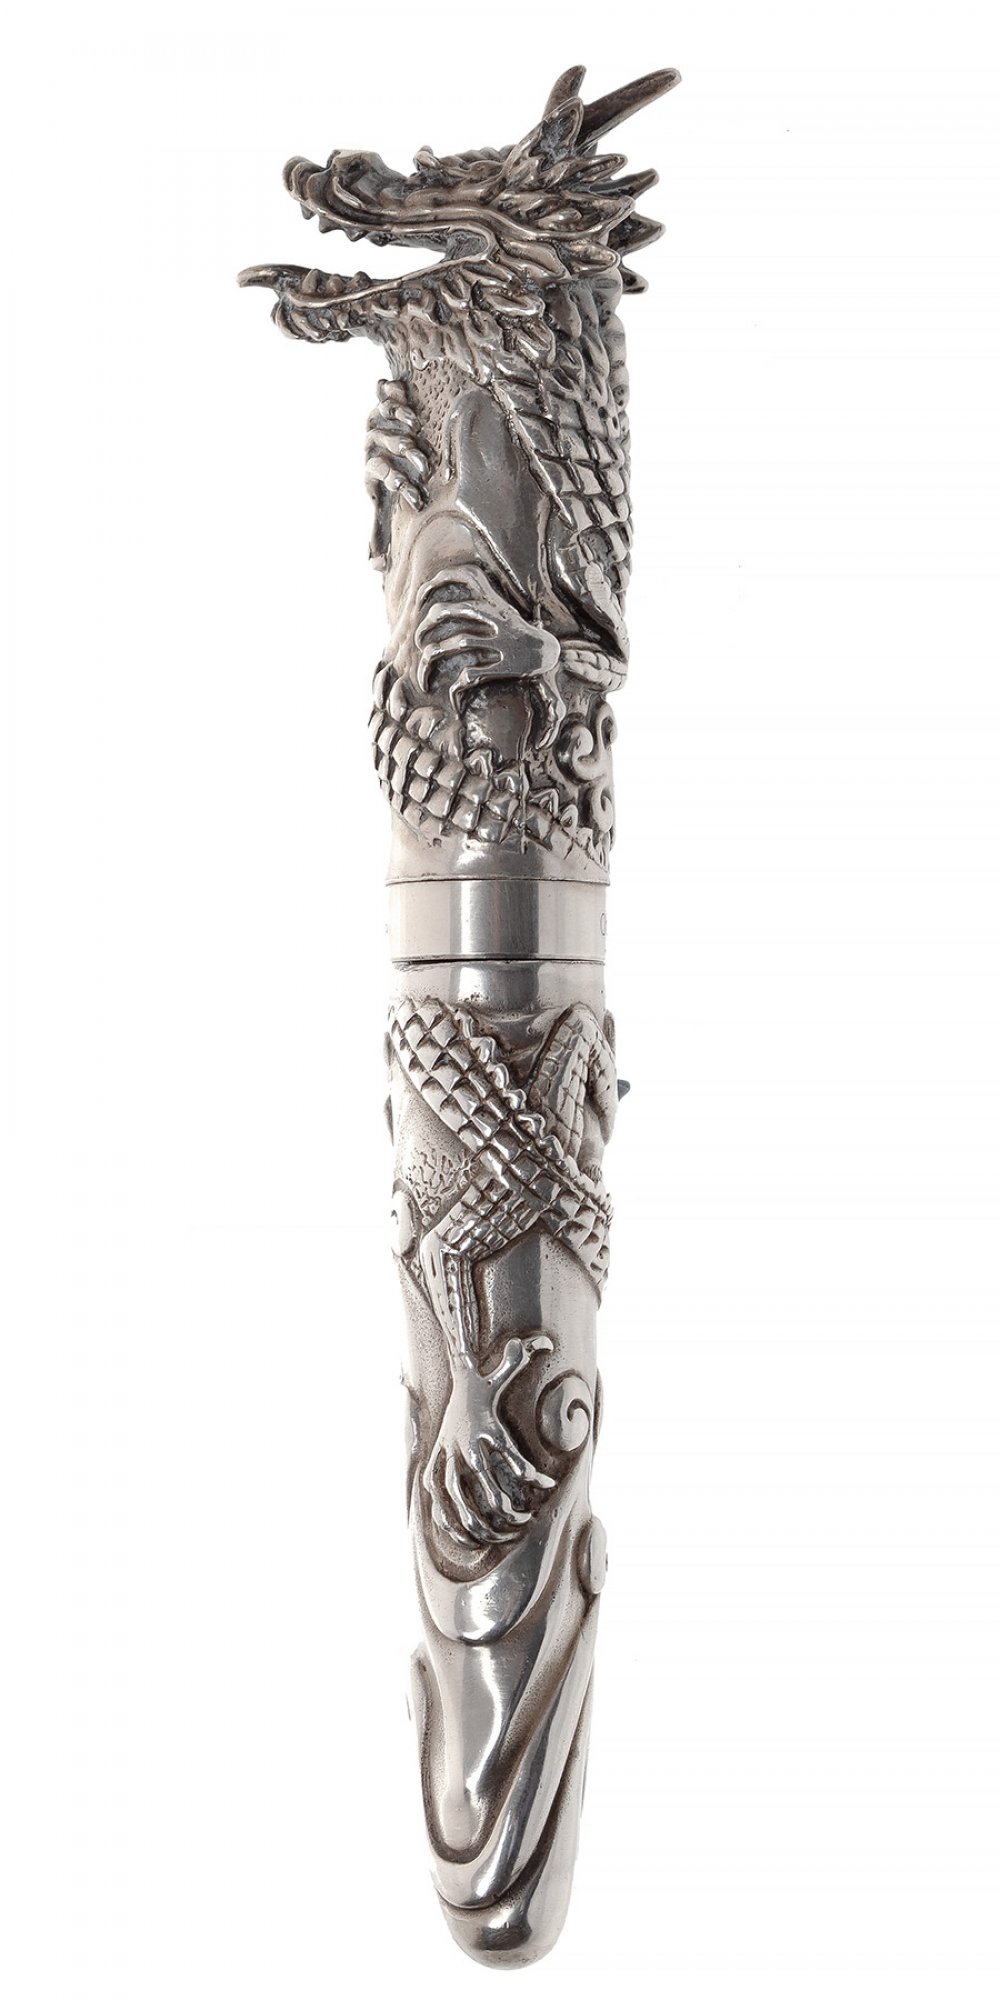 LABAN FOUNTAIN PEN.Barrel and cap in 925 sterling silver.Limited edition 64/800.Silver-plated nib, - Image 3 of 5